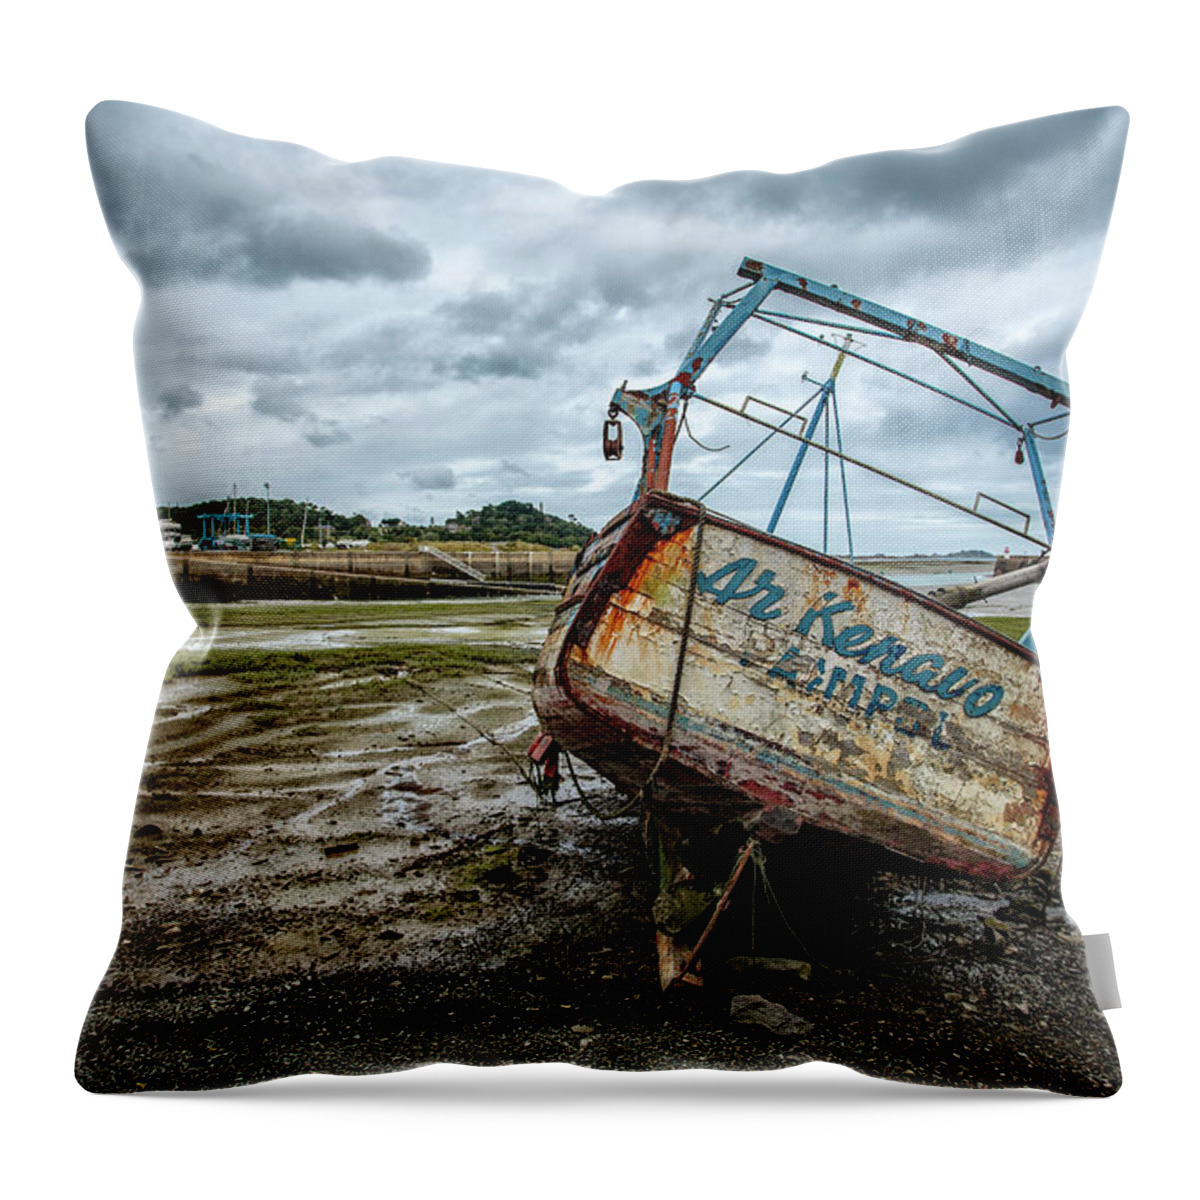 Boat Throw Pillow featuring the photograph Boats by the Sea by Nailia Schwarz